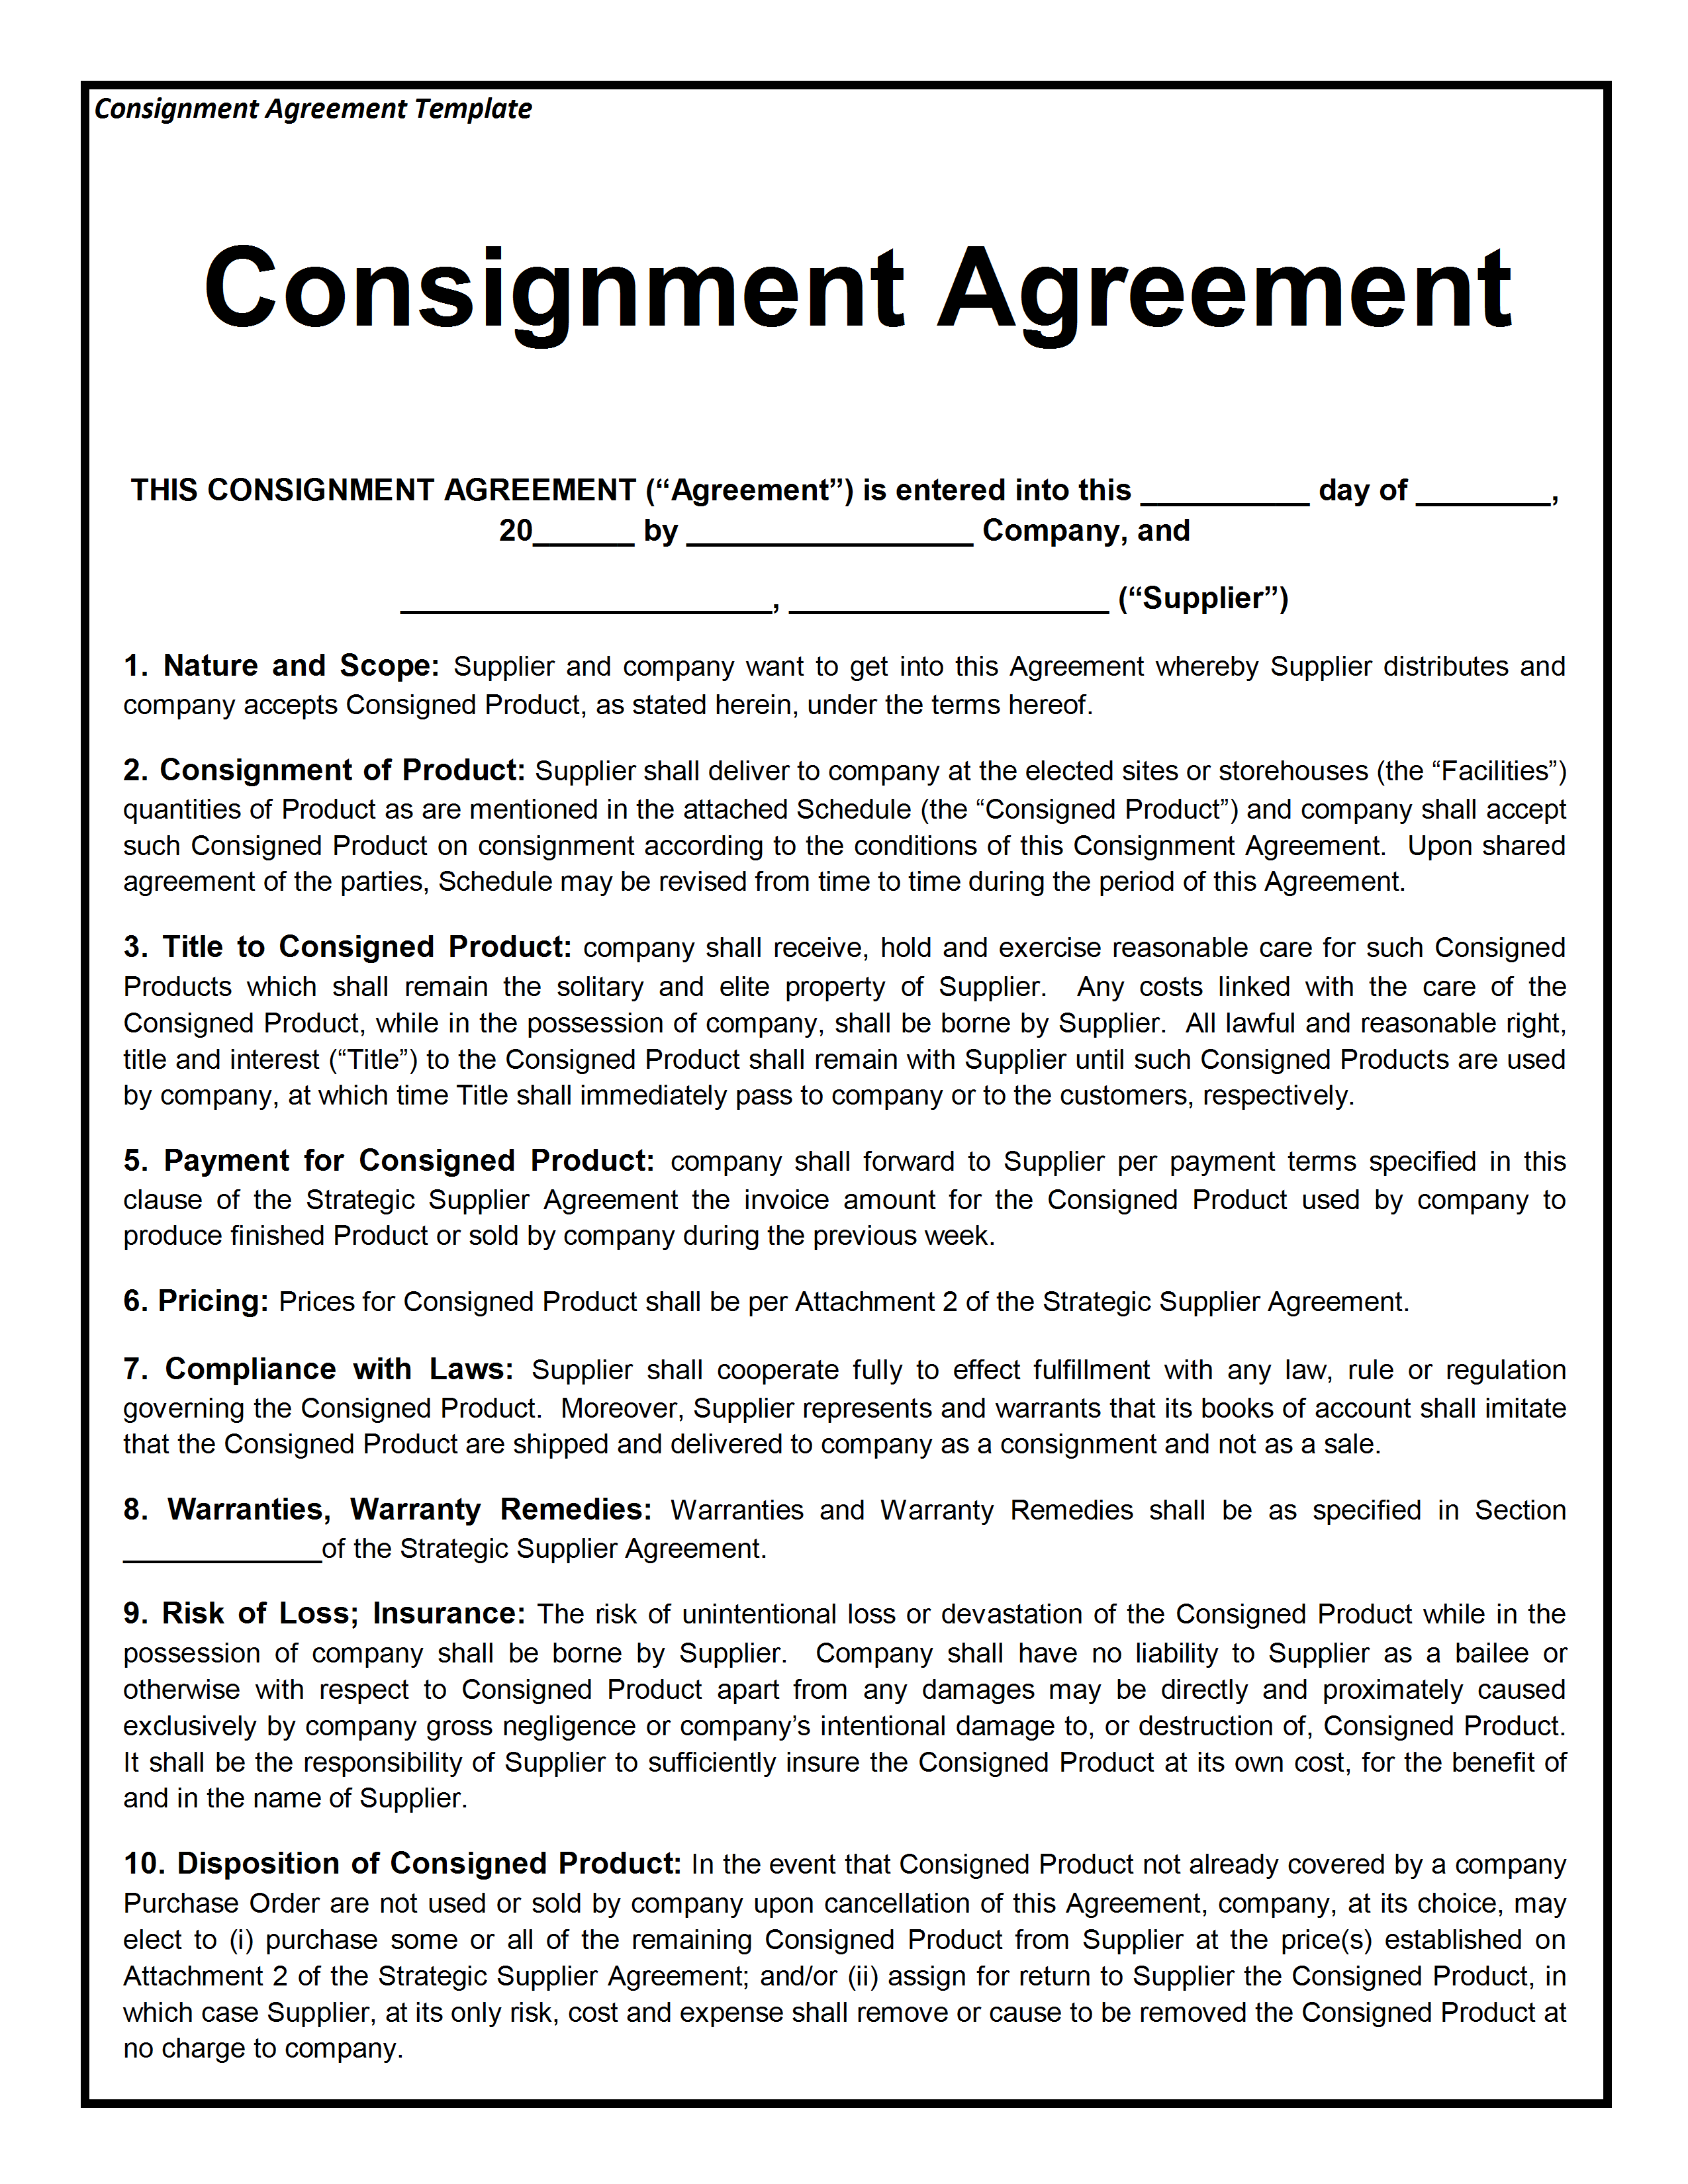 Consignment Agreement Sample